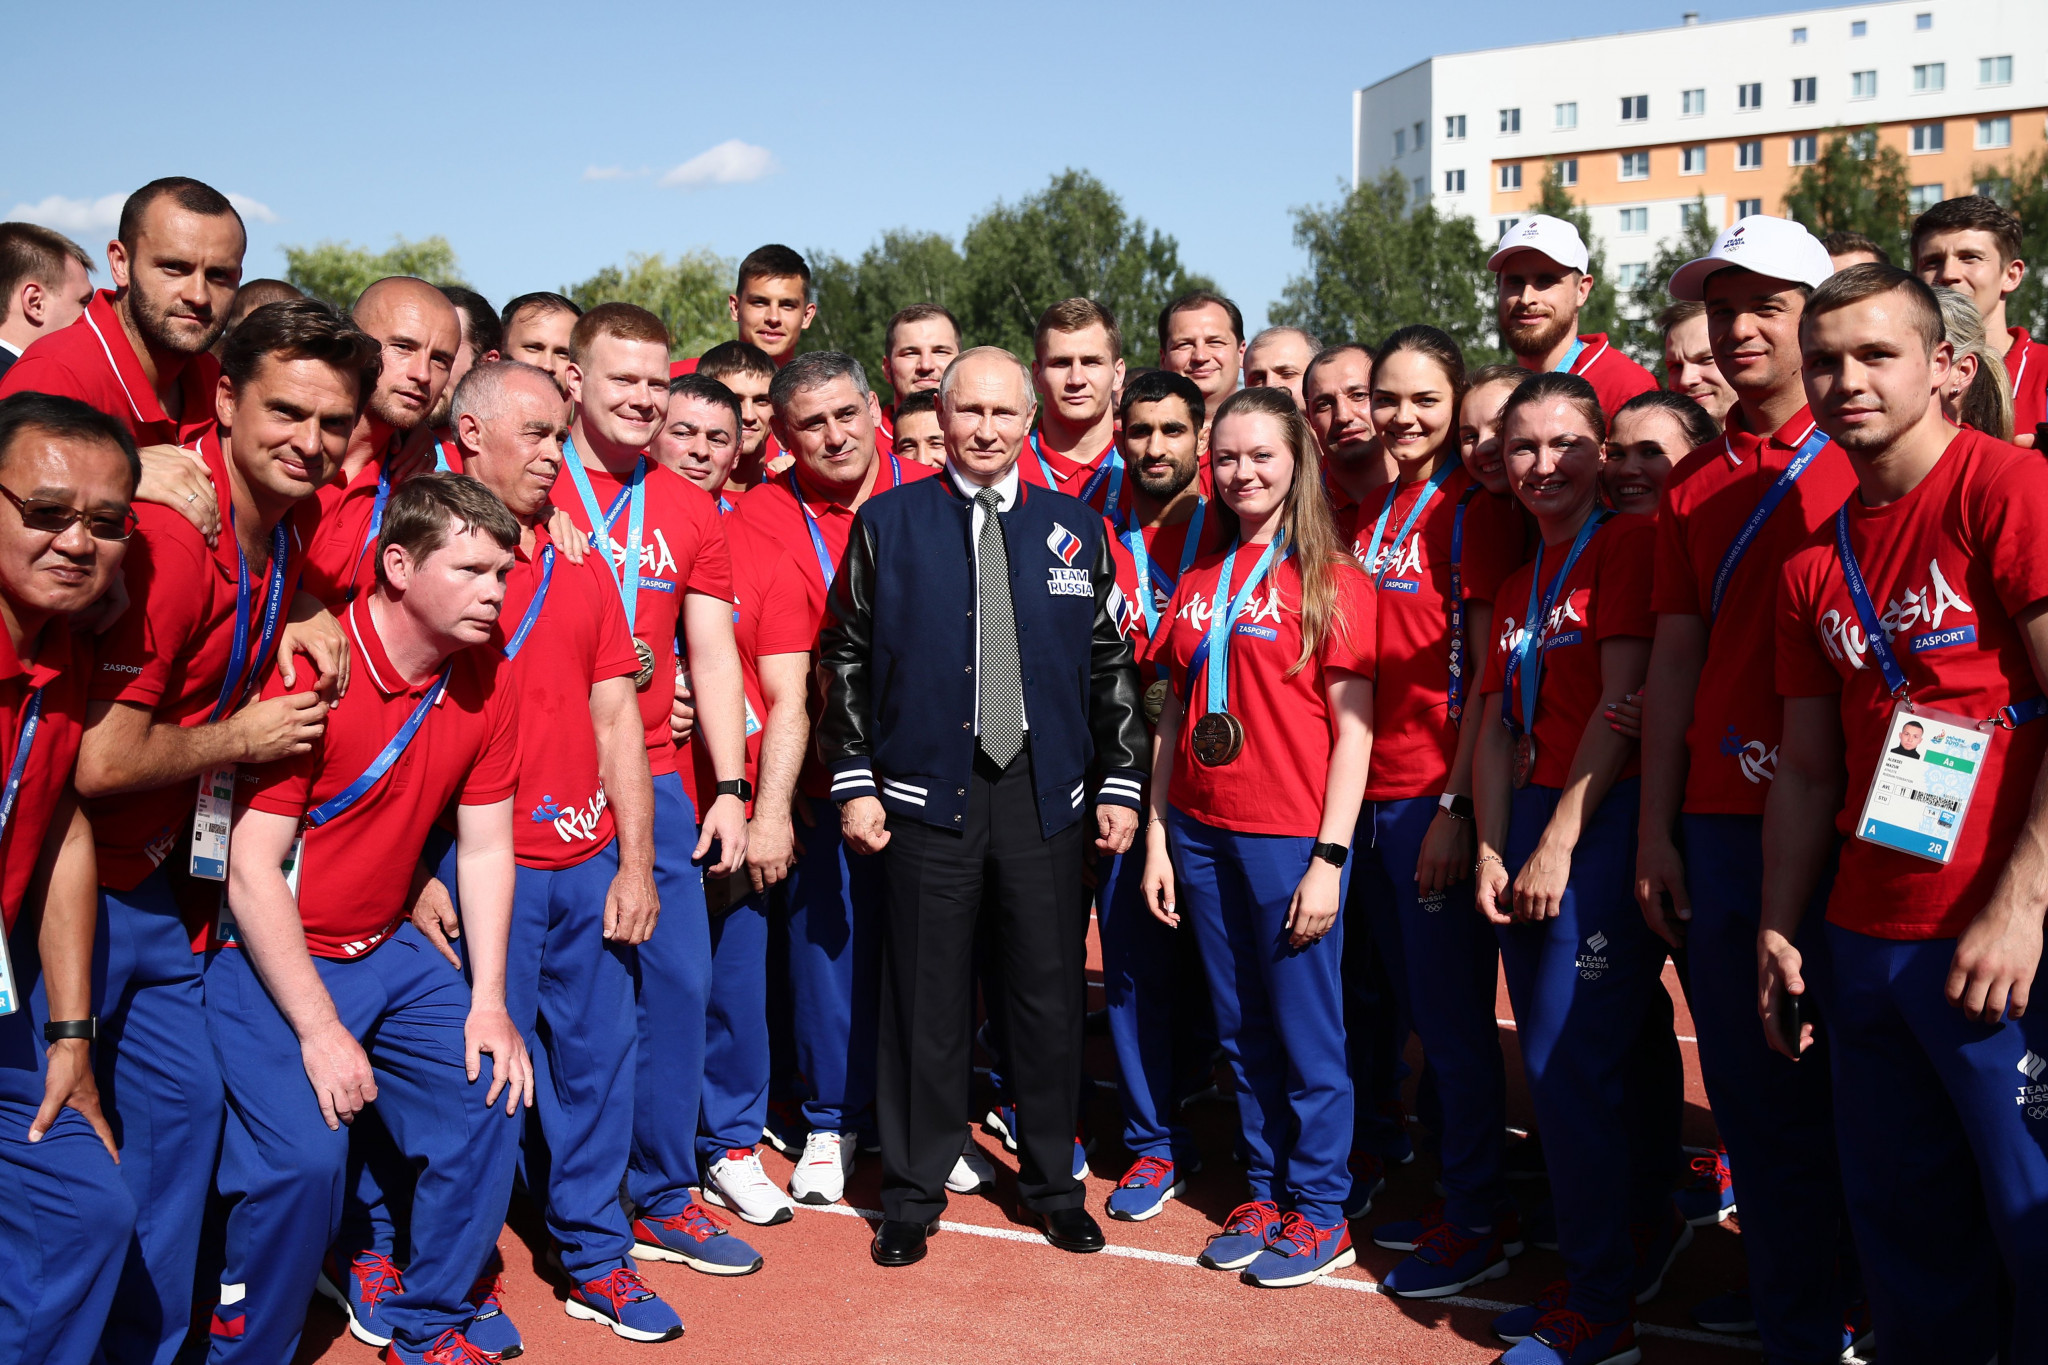 Russian President Vladimir Putin, pictured here with athletes during the recently-concluded European Games in Minsk, has ordered the ROC to ensure the IAAF ban imposed on the country is lifted by the end of the year ©Getty Images